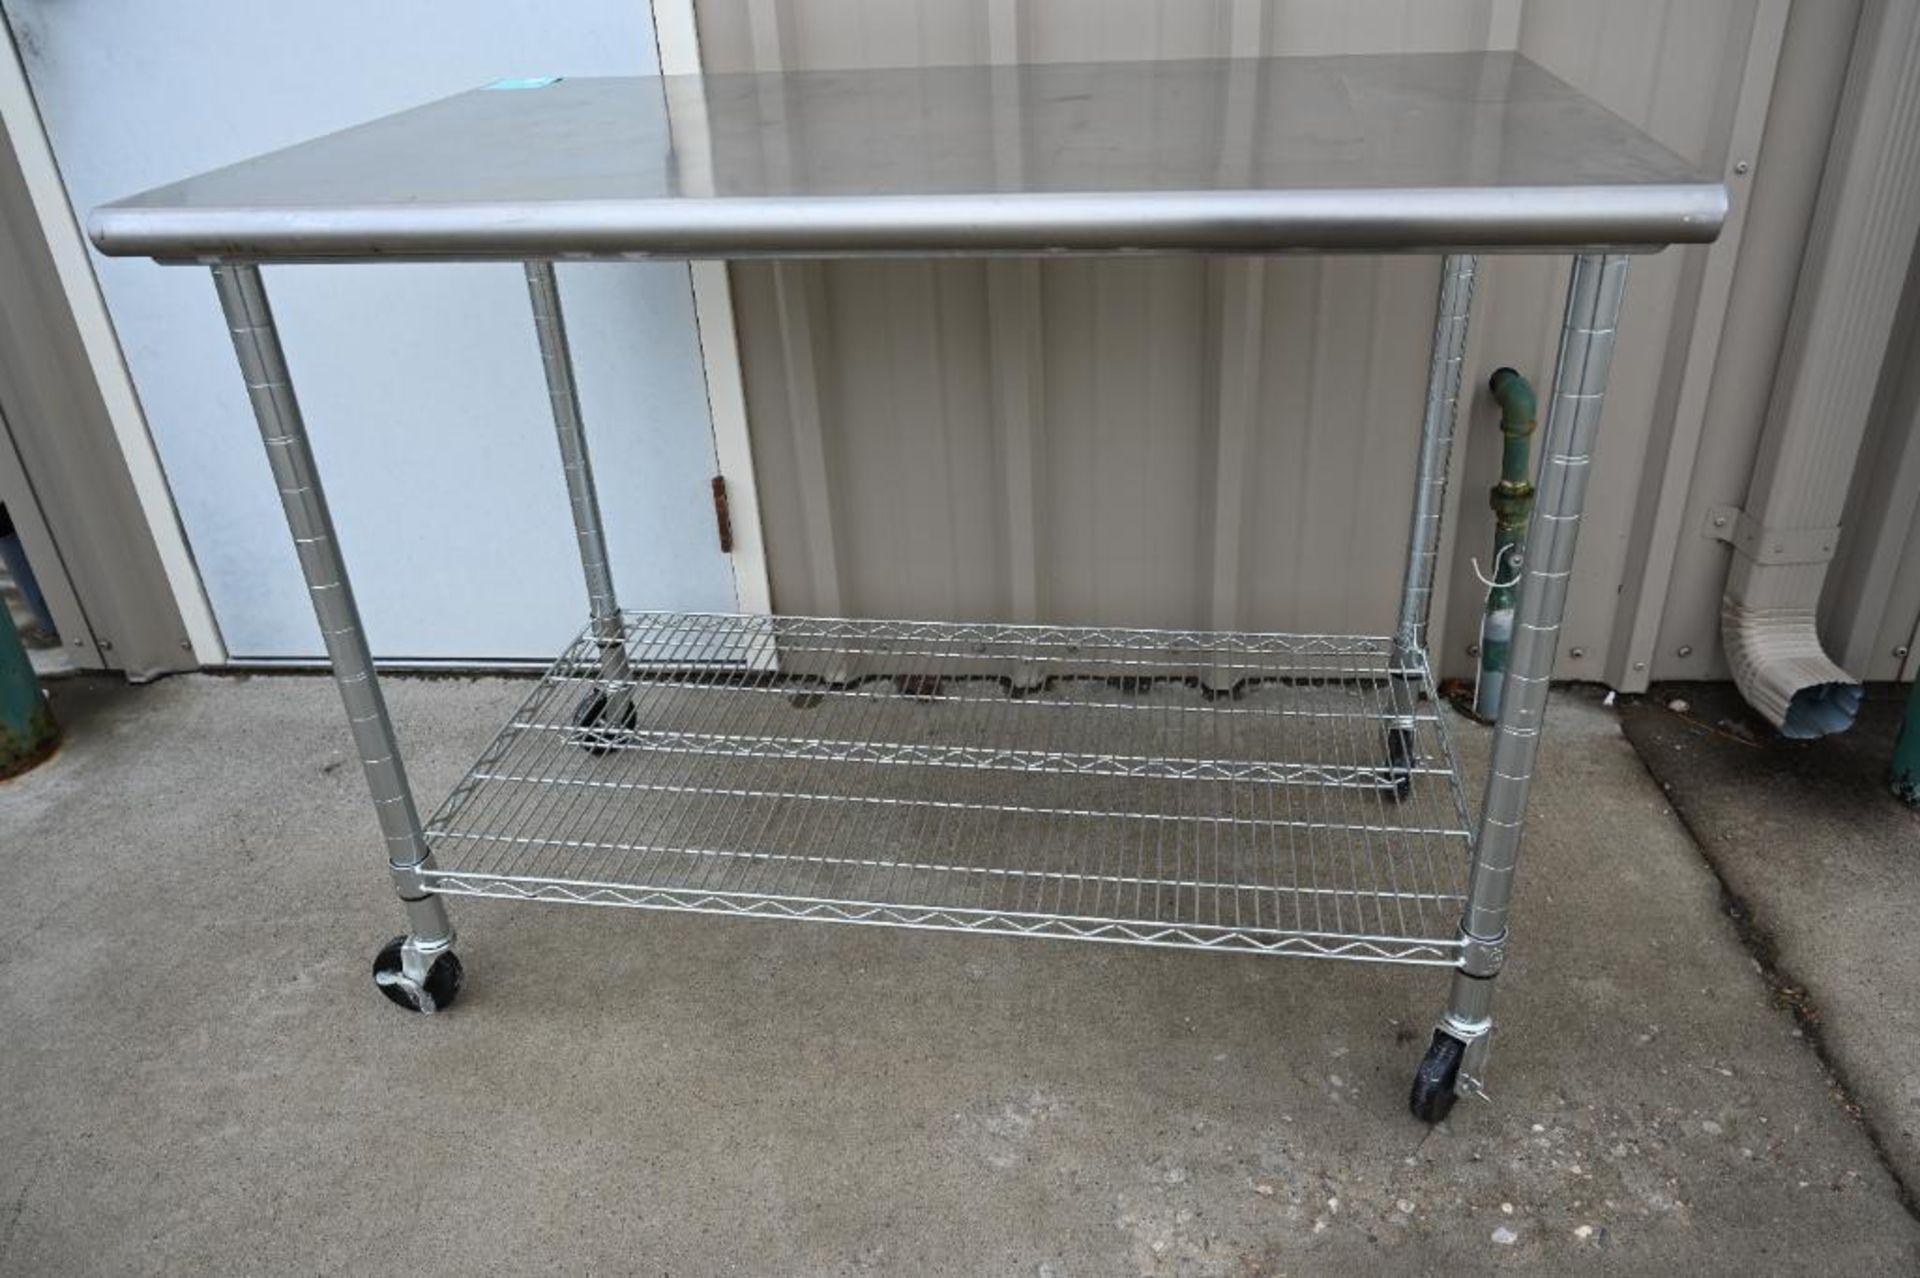 NSF 48" Stainless Steel Work Table with Casters - Image 10 of 10